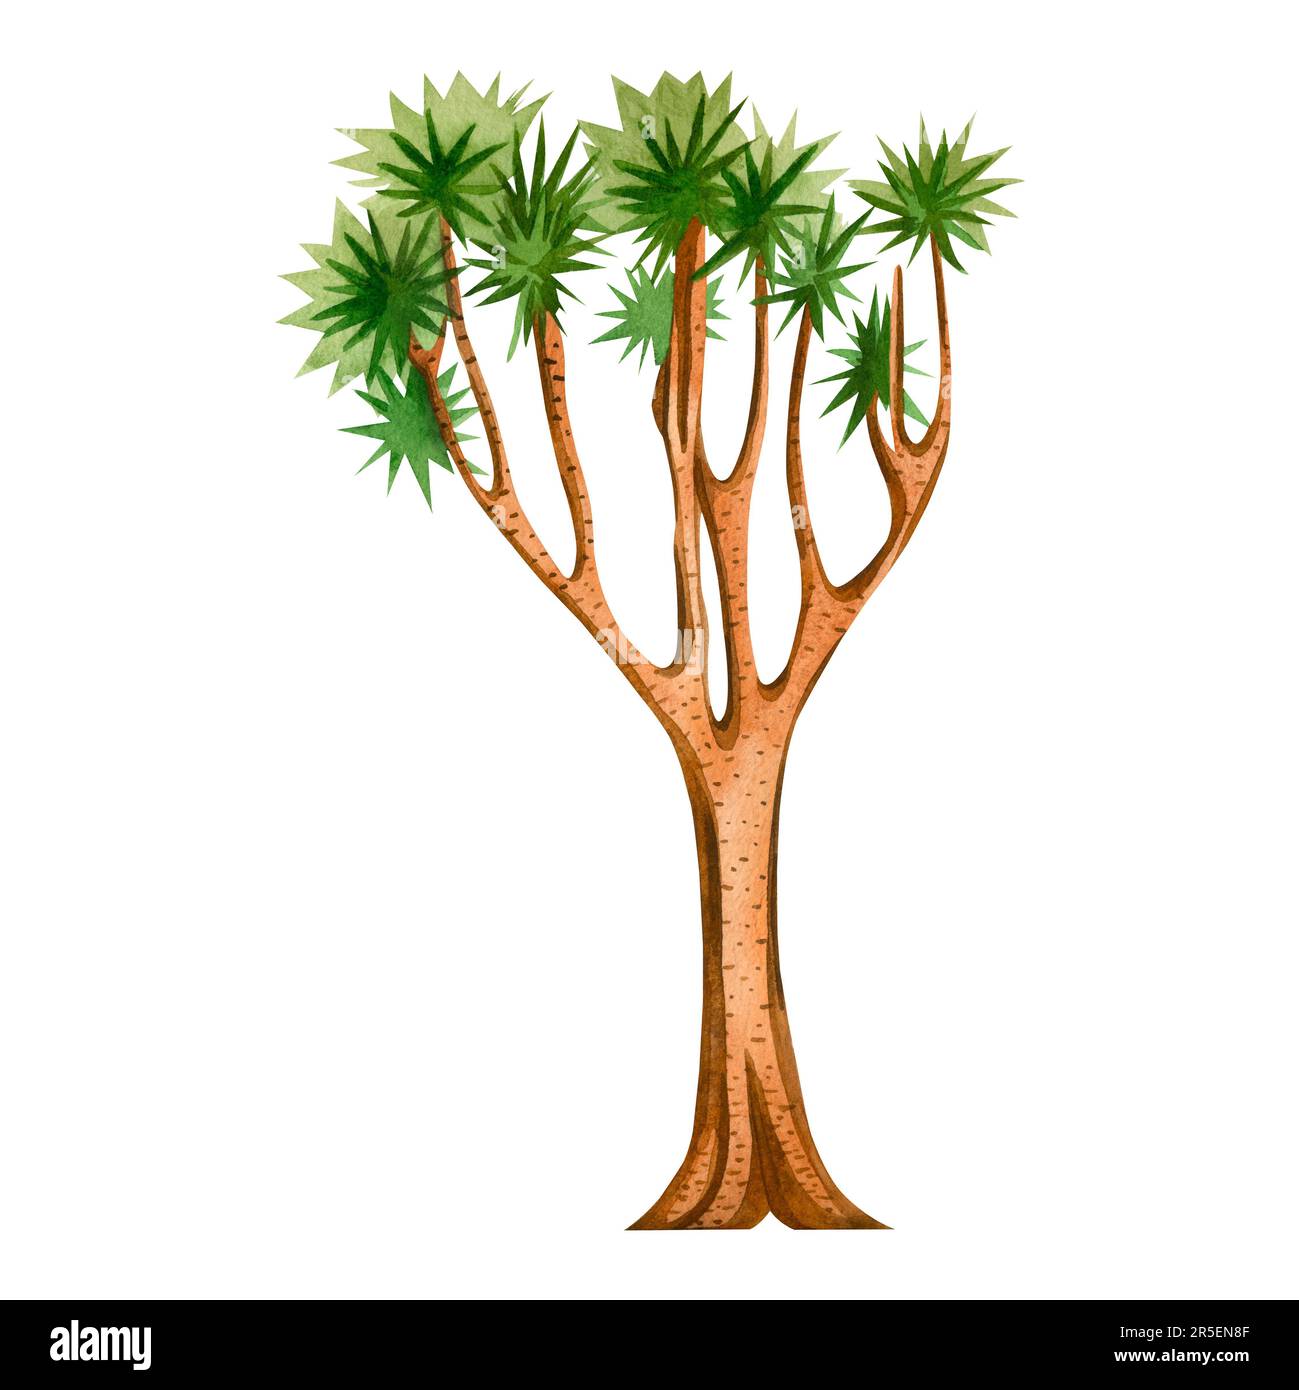 Quiver tree of the Kalahari desert painted in brown and green watercolor on a white background. Suitable for printing on fabric, paper, books Stock Photo